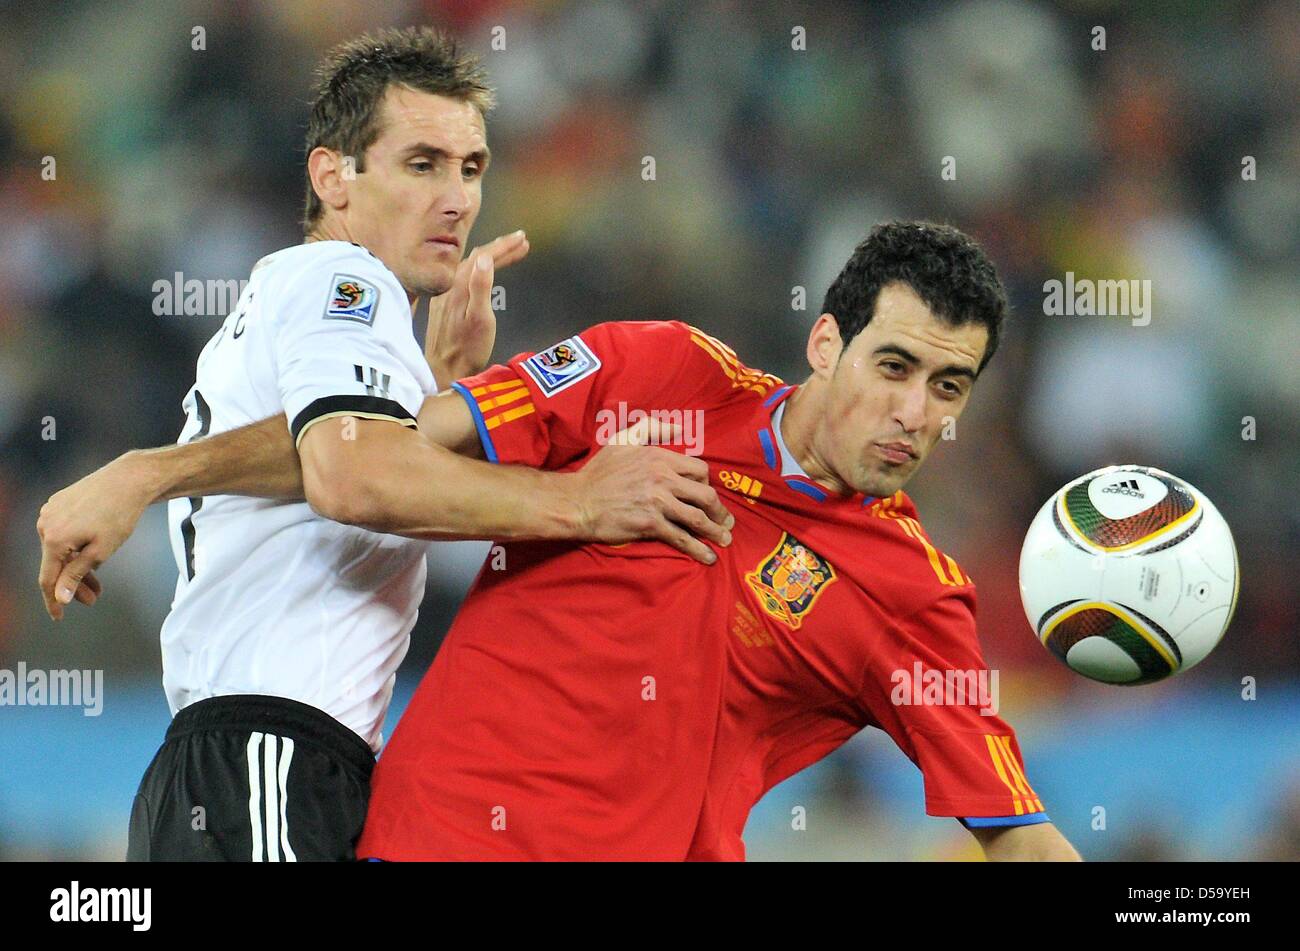 Miroslav Klose (L) of Germany vies with Sergio Busquets of Spain during the 2010 FIFA World Cup semi-final match between Germany and Spain at the Durban Stadium in Durban, South Africa 07 July 2010. Photo: Bernd Weissbrod dpa - Please refer to http://dpaq.de/FIFA-WM2010-TC  +++(c) dpa - Bildfunk+++ Stock Photo